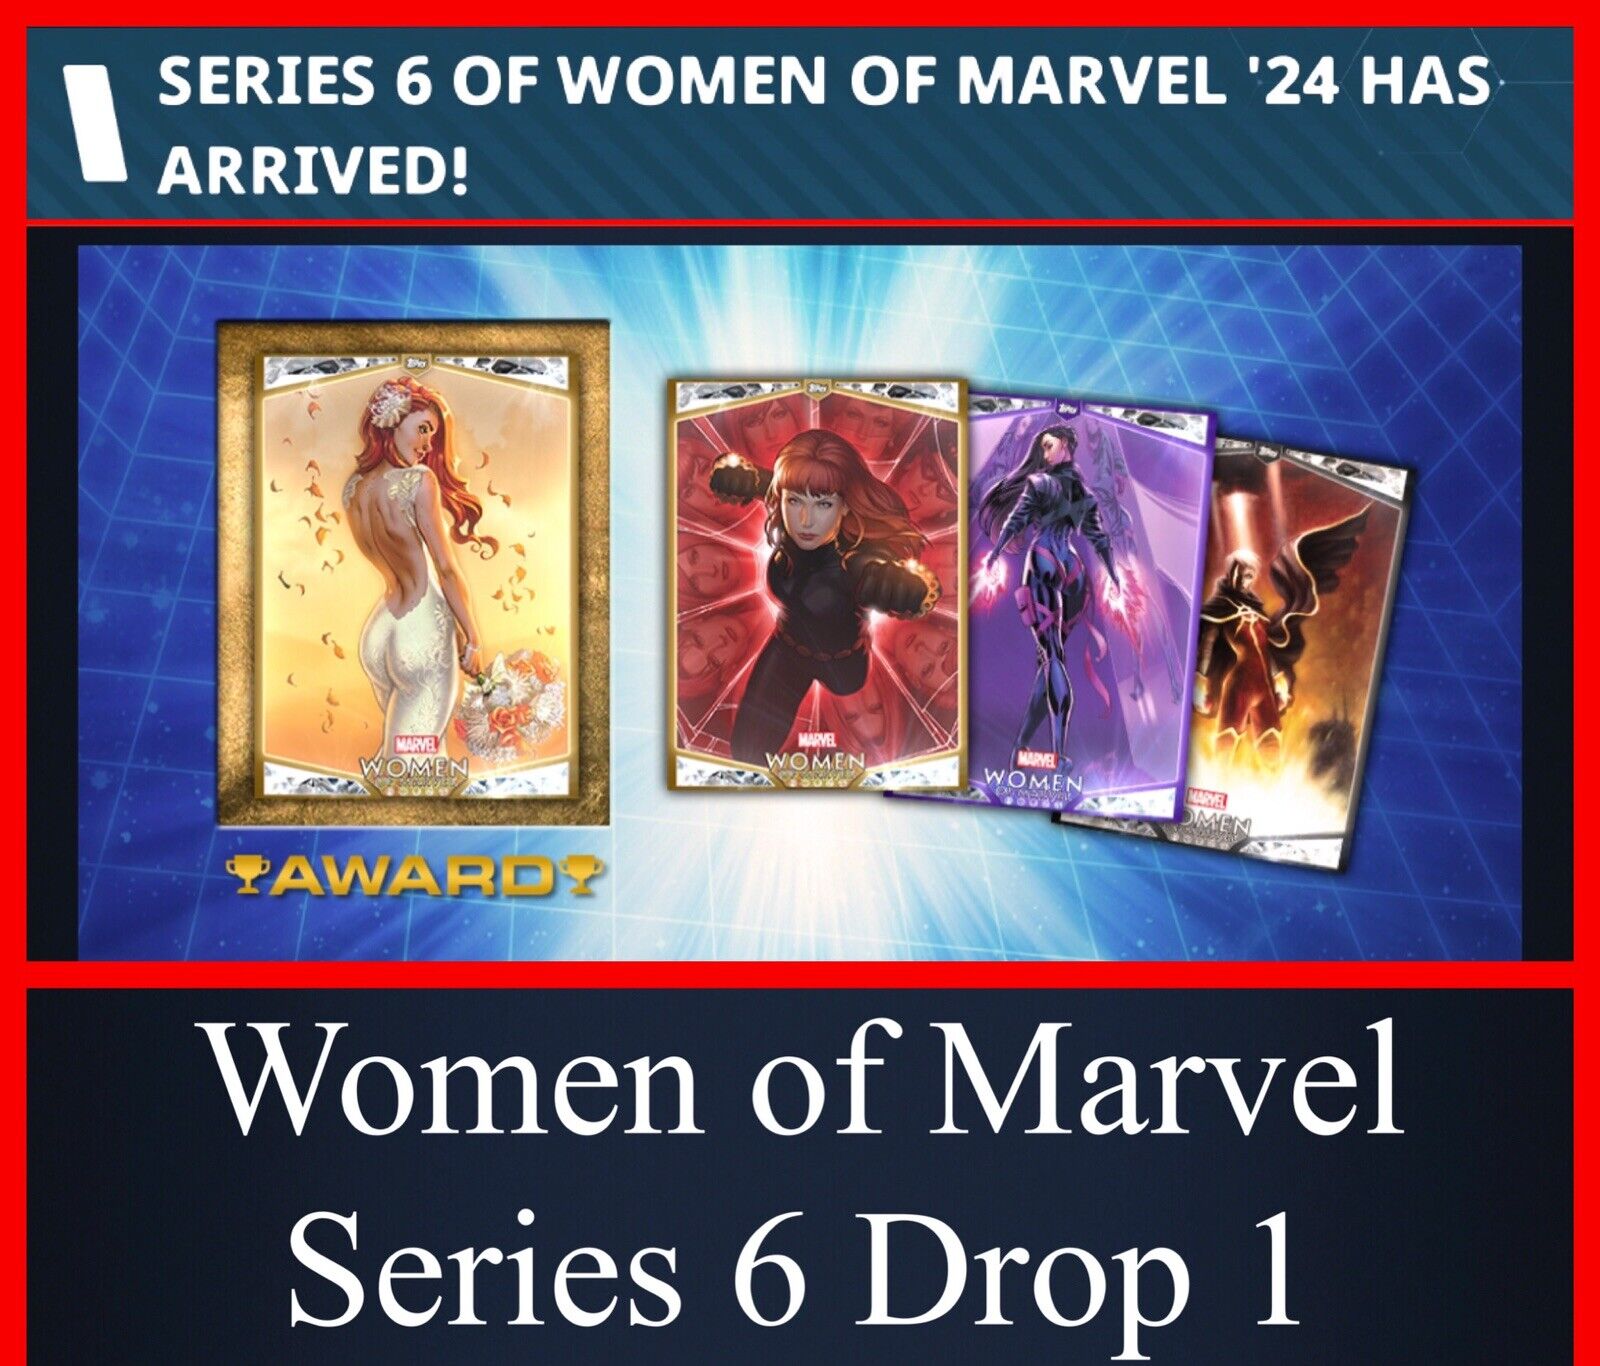 TWO RARE SETS OF WOMEN OF MARVEL 24 SERIES 6/DROP 1-TOPPS MARVEL COLLECT